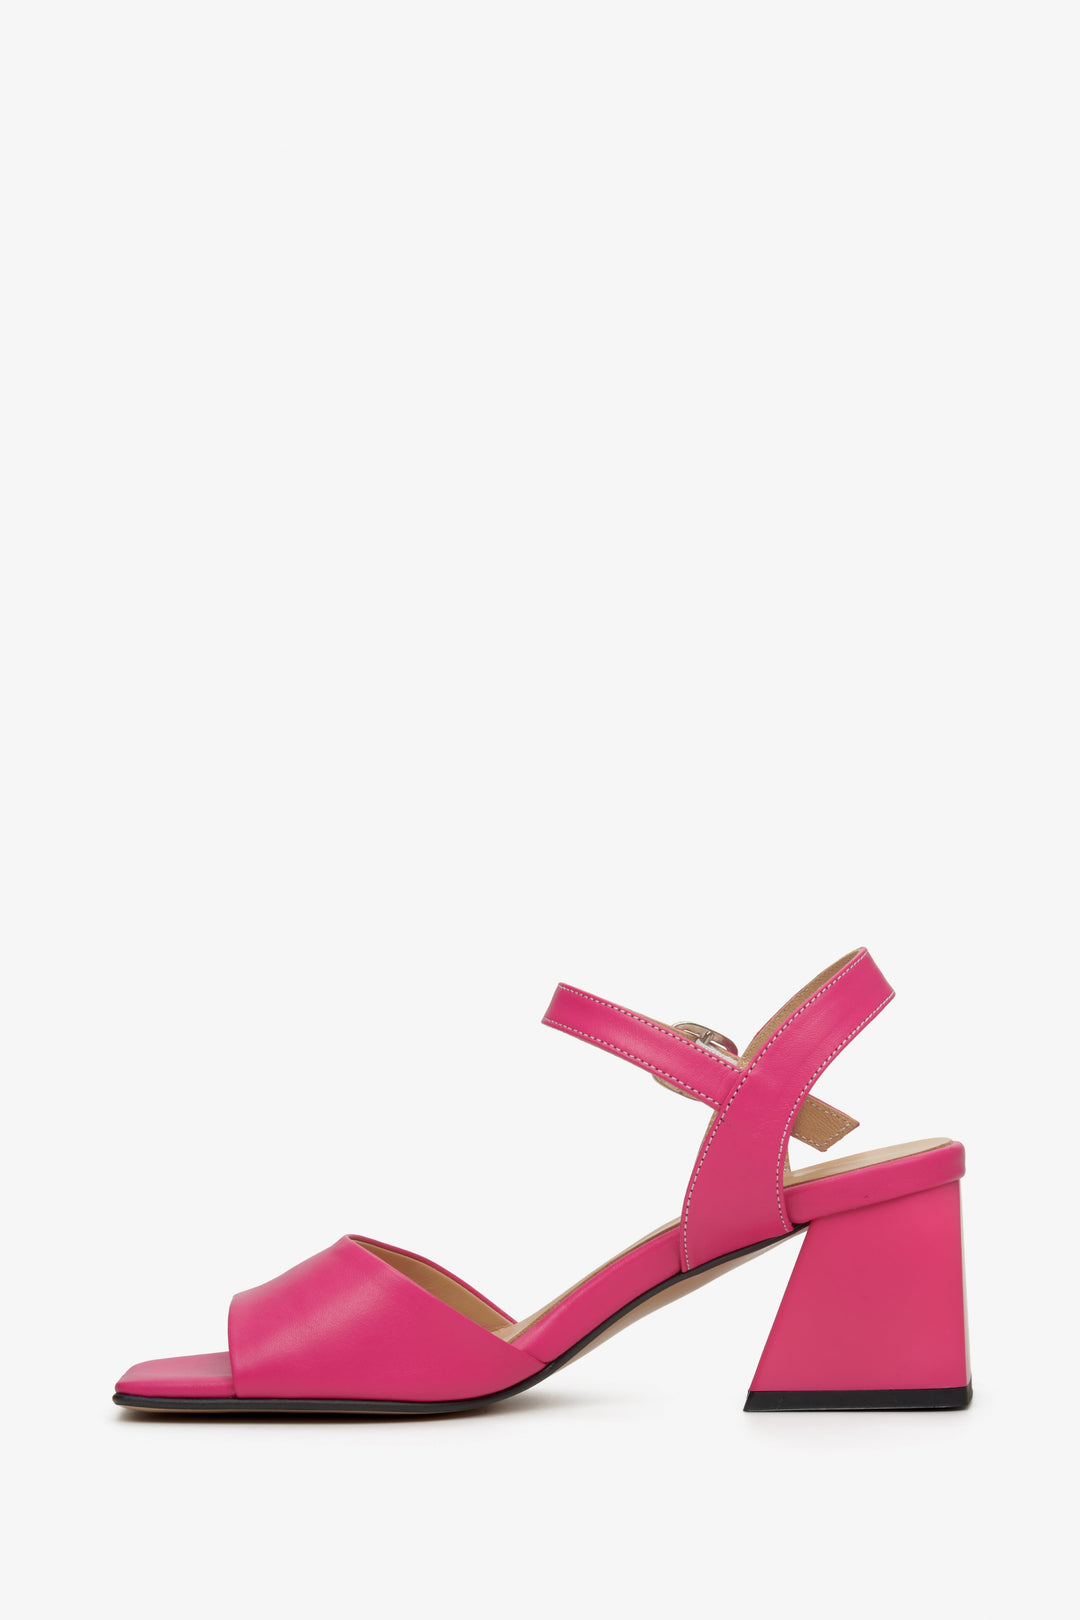 Women's pink leather summer heeled sandals by Estro - presentation of the shoe profile.